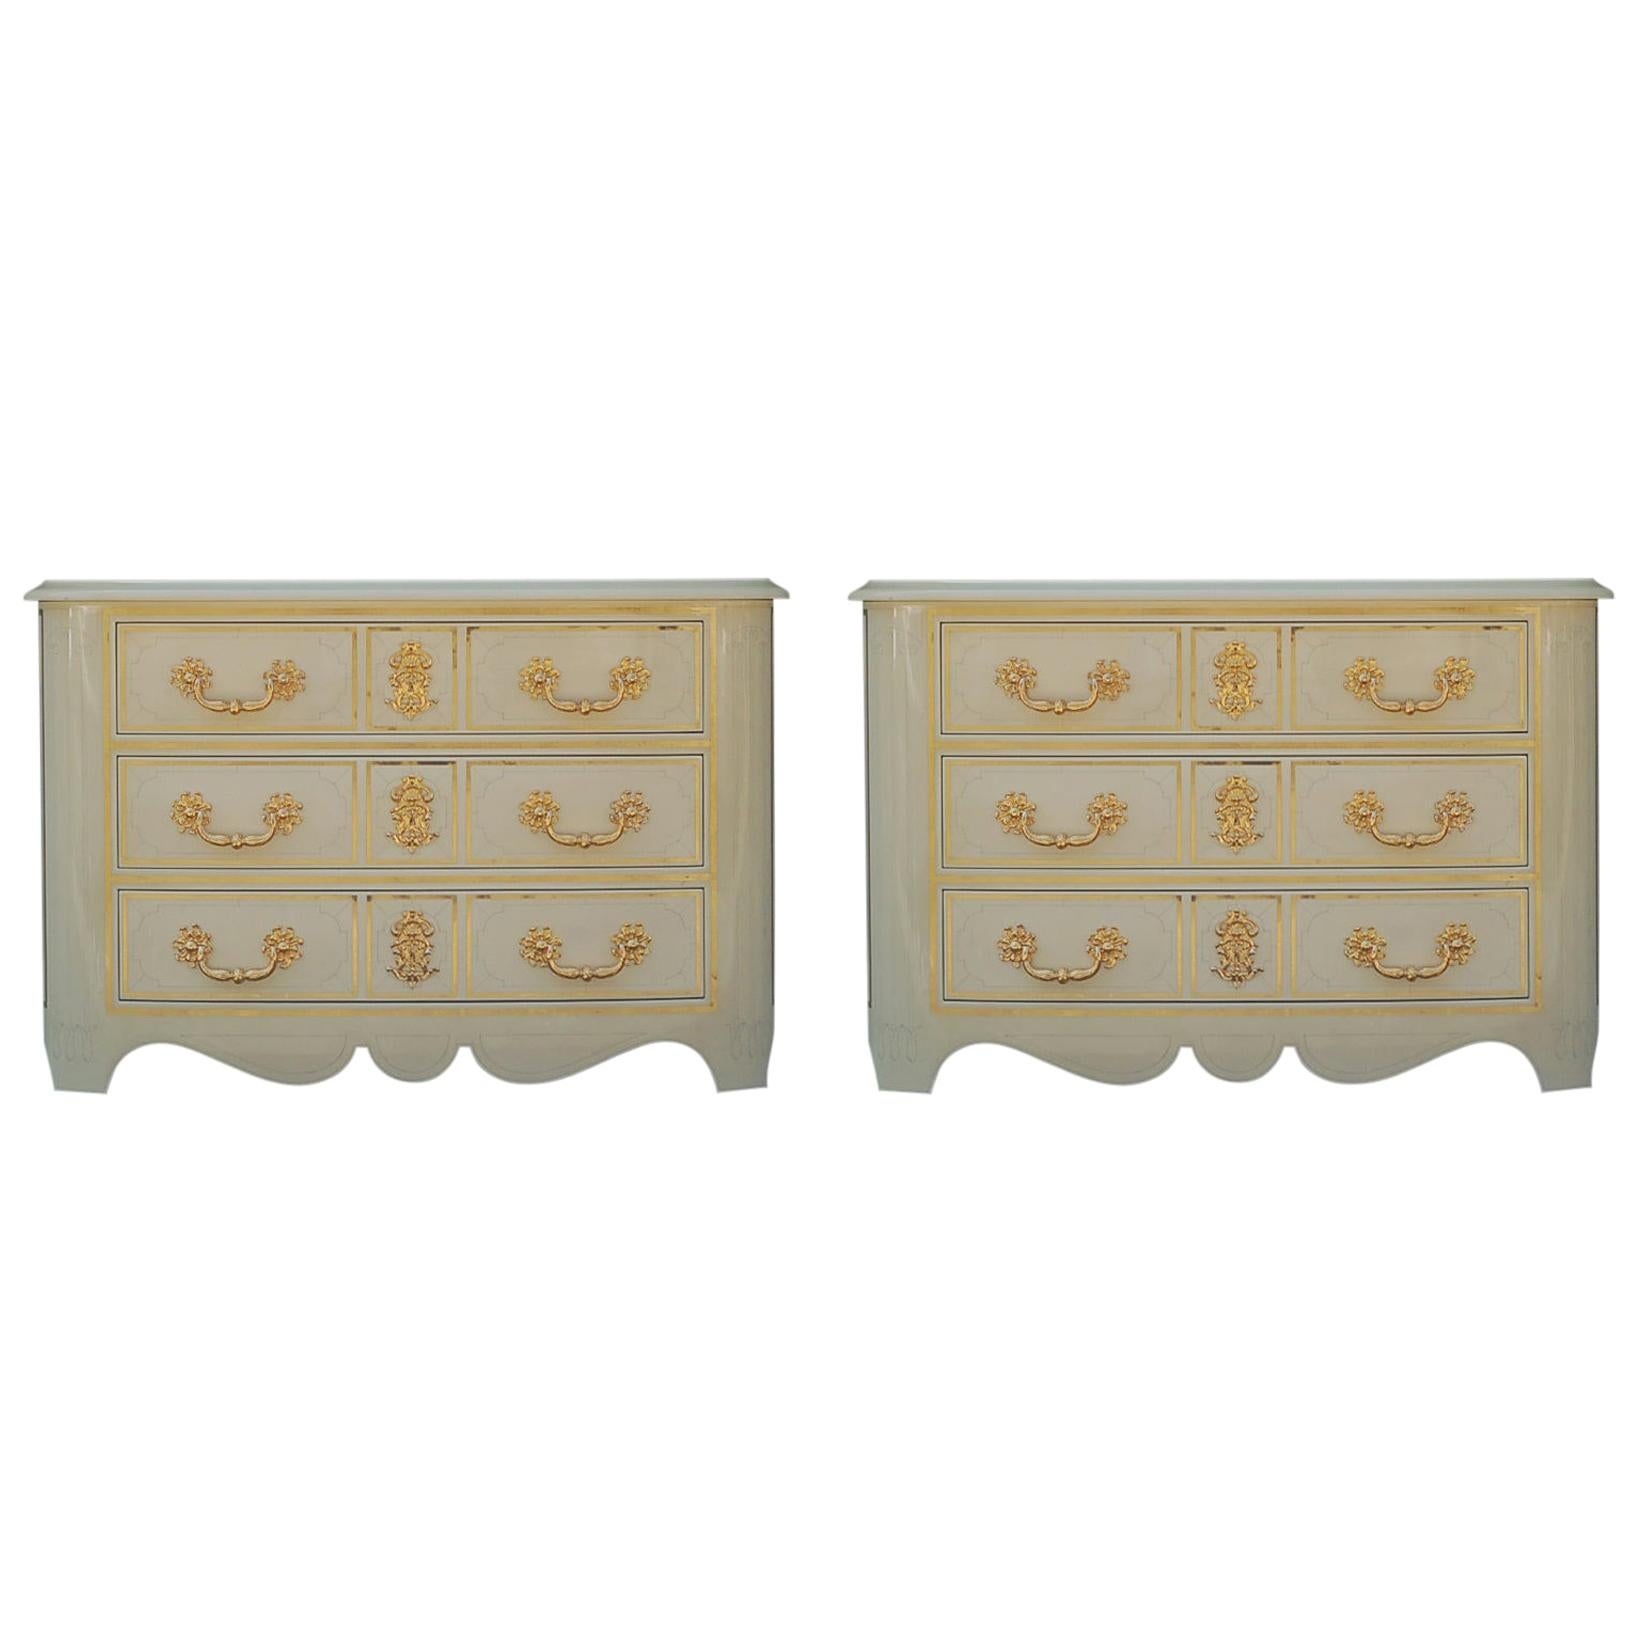 Matching Pair of Italian Ivory White Lacquer Commodes or Chests with Gold Leaf